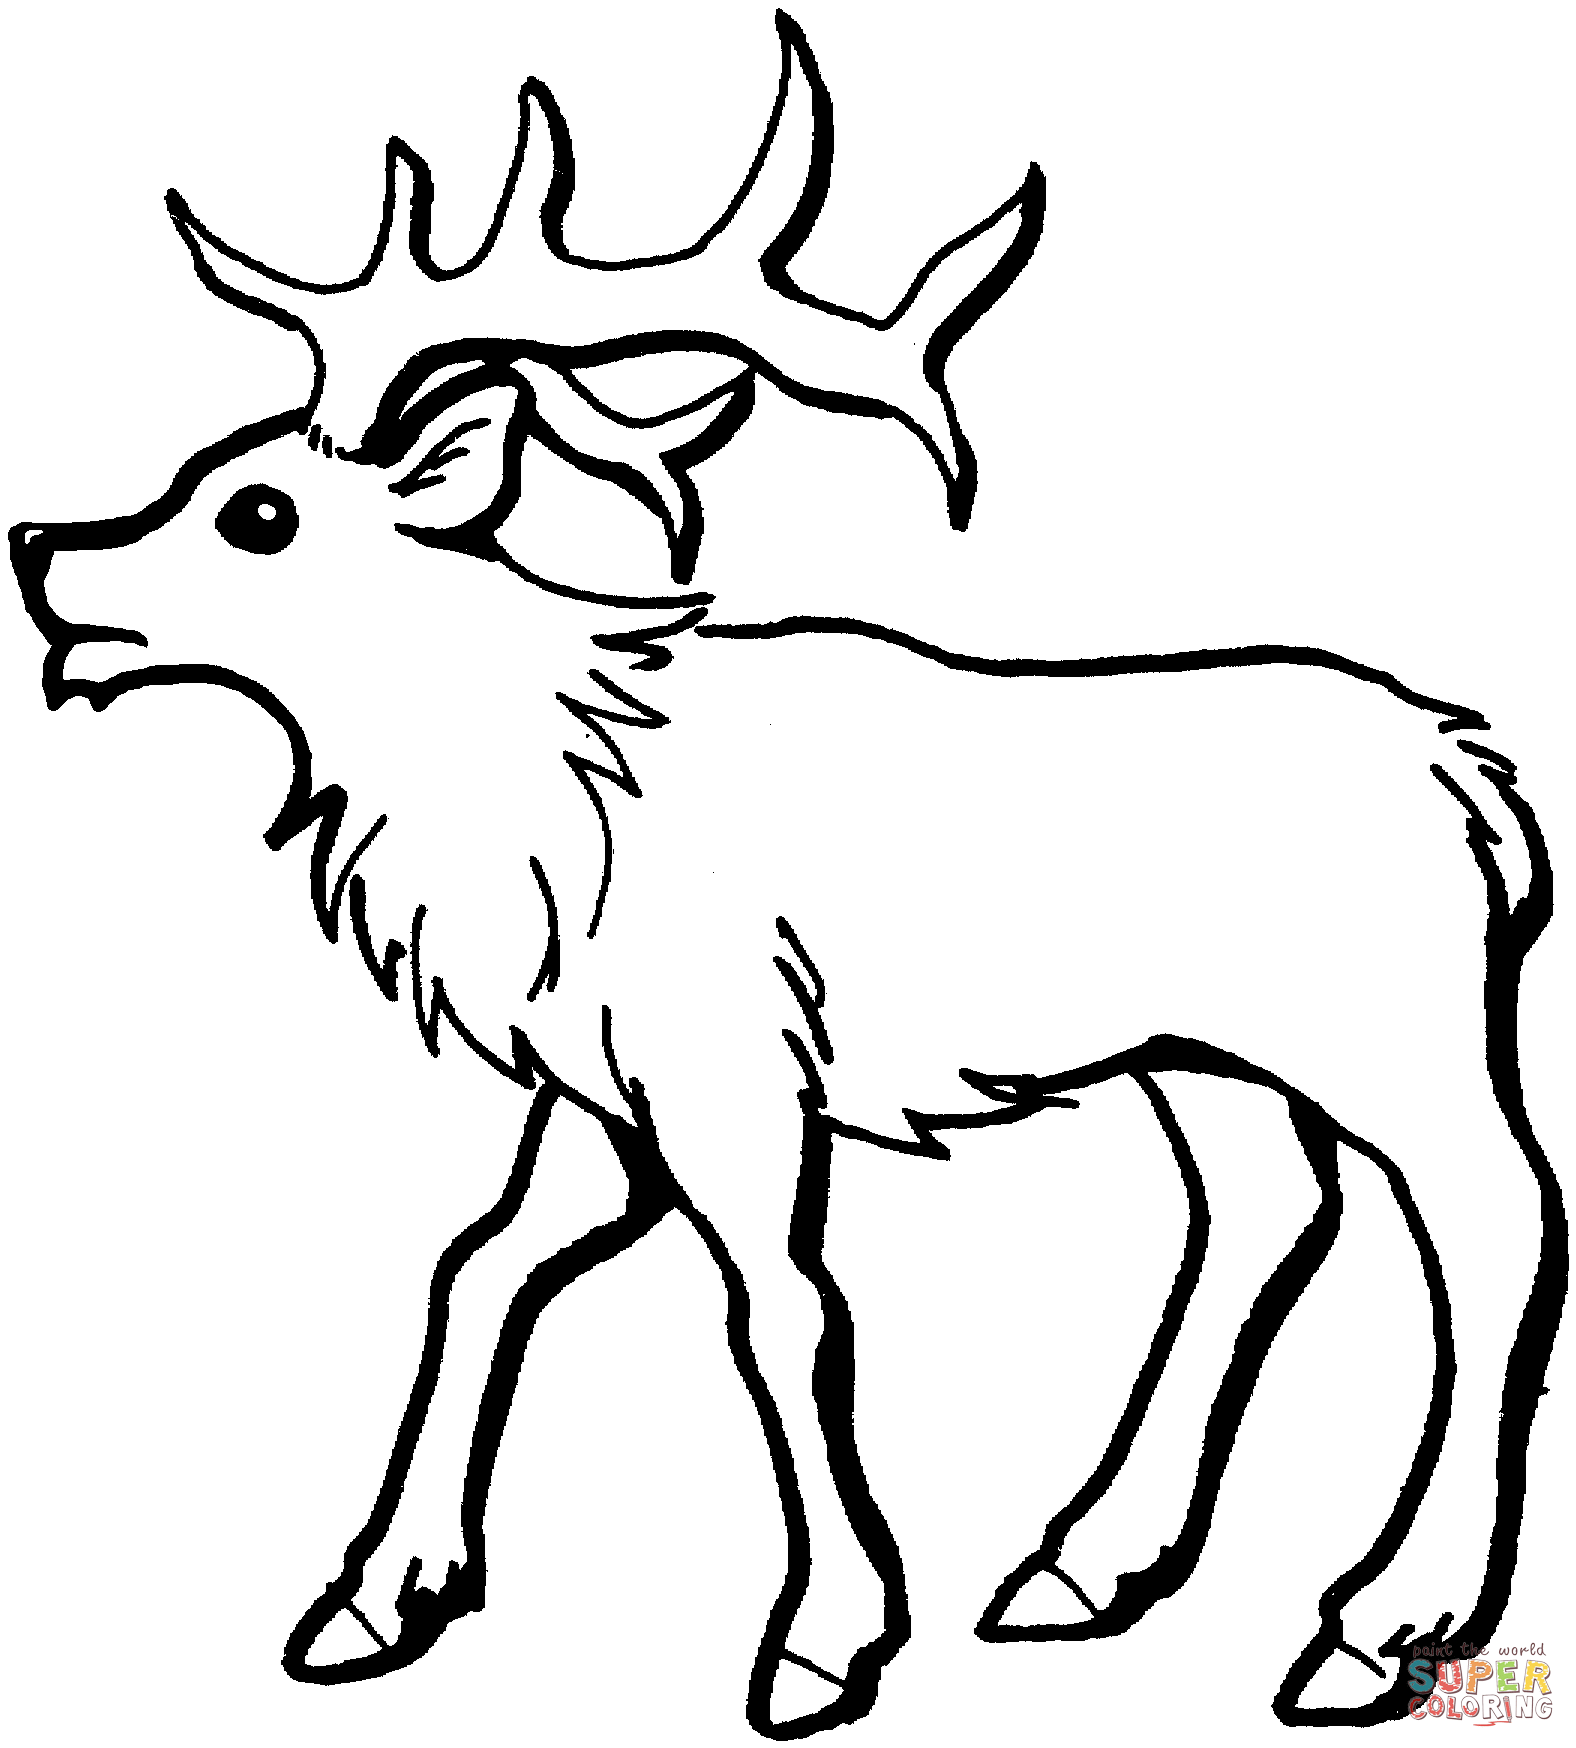 elk-coloring-pages-printable-printable-word-searches